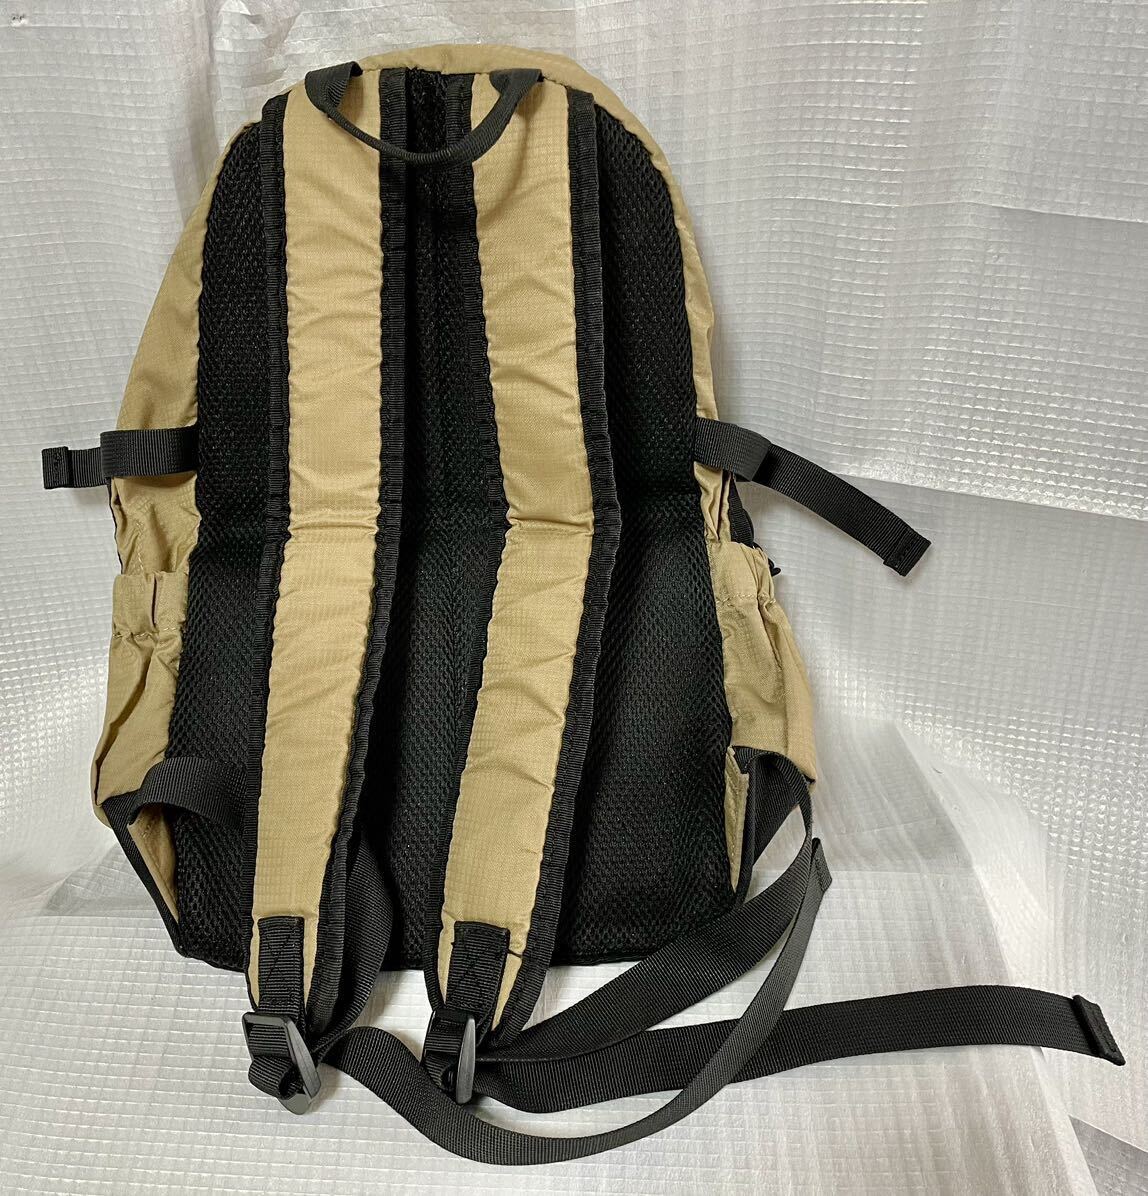 LOGOS rucksack backpack mother's bag outdoor nylon use have beautiful goods metal fittings cloudiness not equipped dirt wool sphere scrub etc. not equipped 